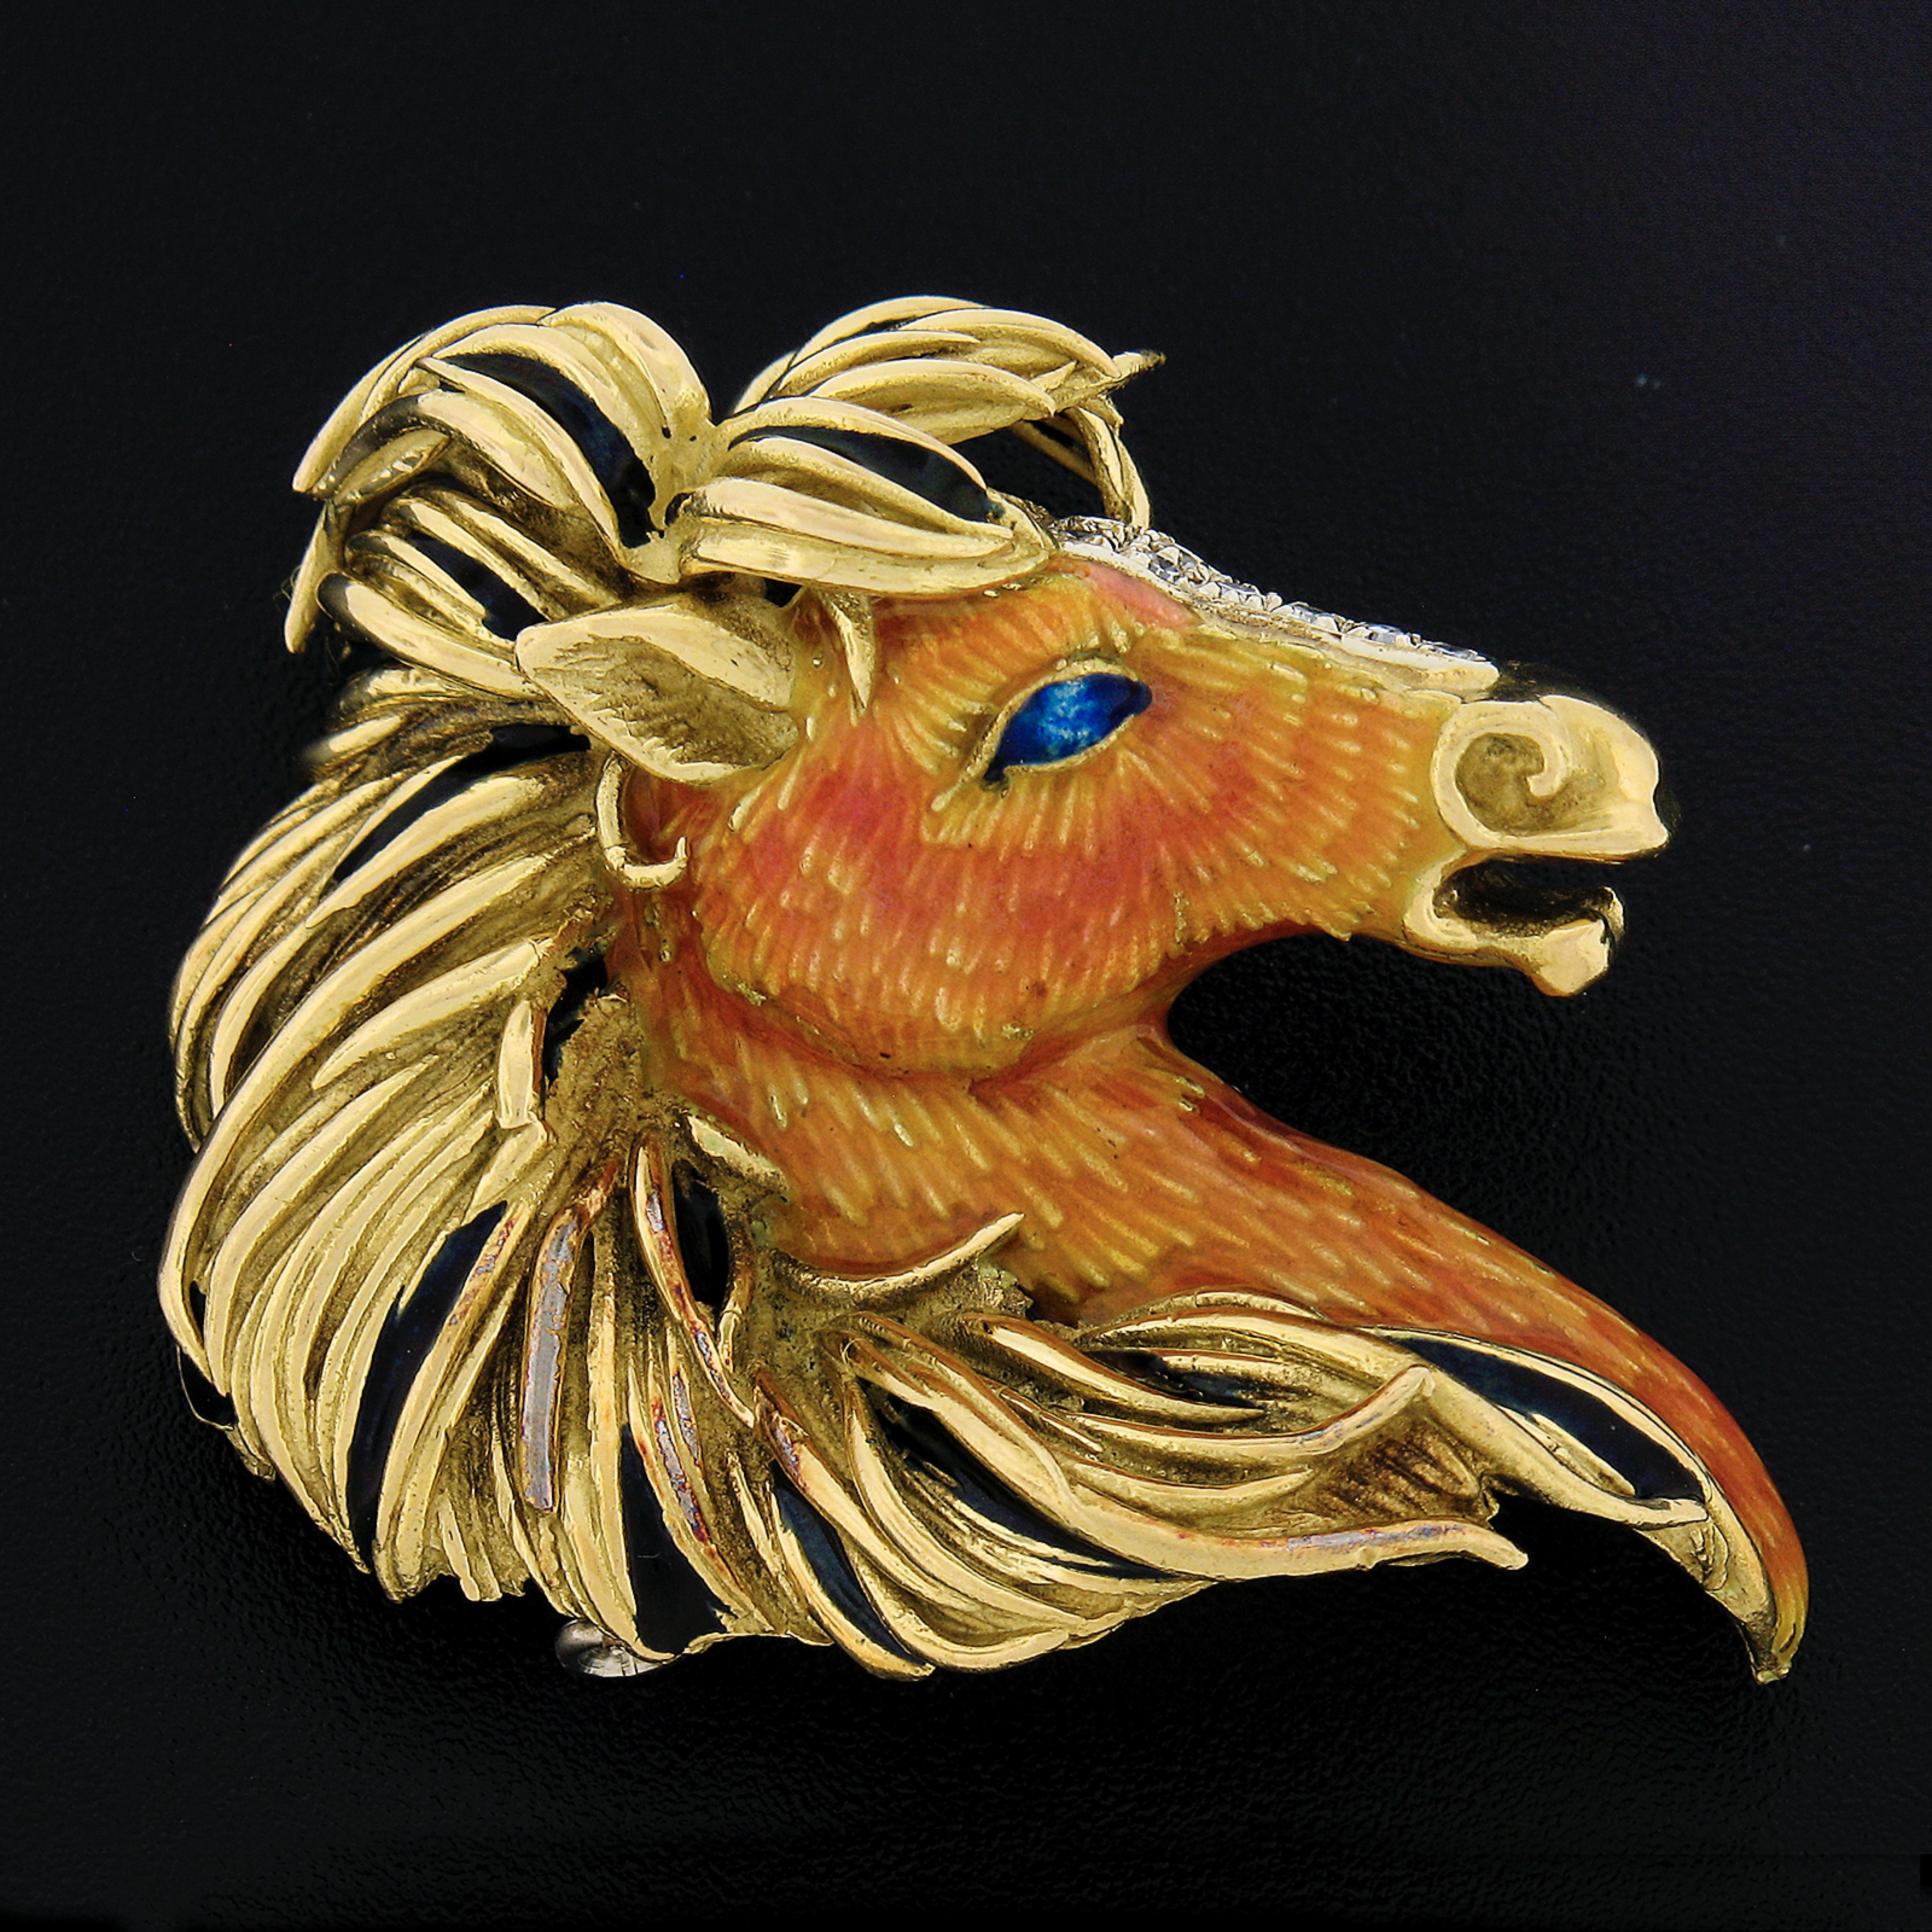 This incredible and very well made Italian pin/brooch by Frascarolo & Co. is crafted from solid 18k yellow gold. It features a perfectly structured 3D horse head design with remarkably outstanding workmanship. The texture that is covered by enamel